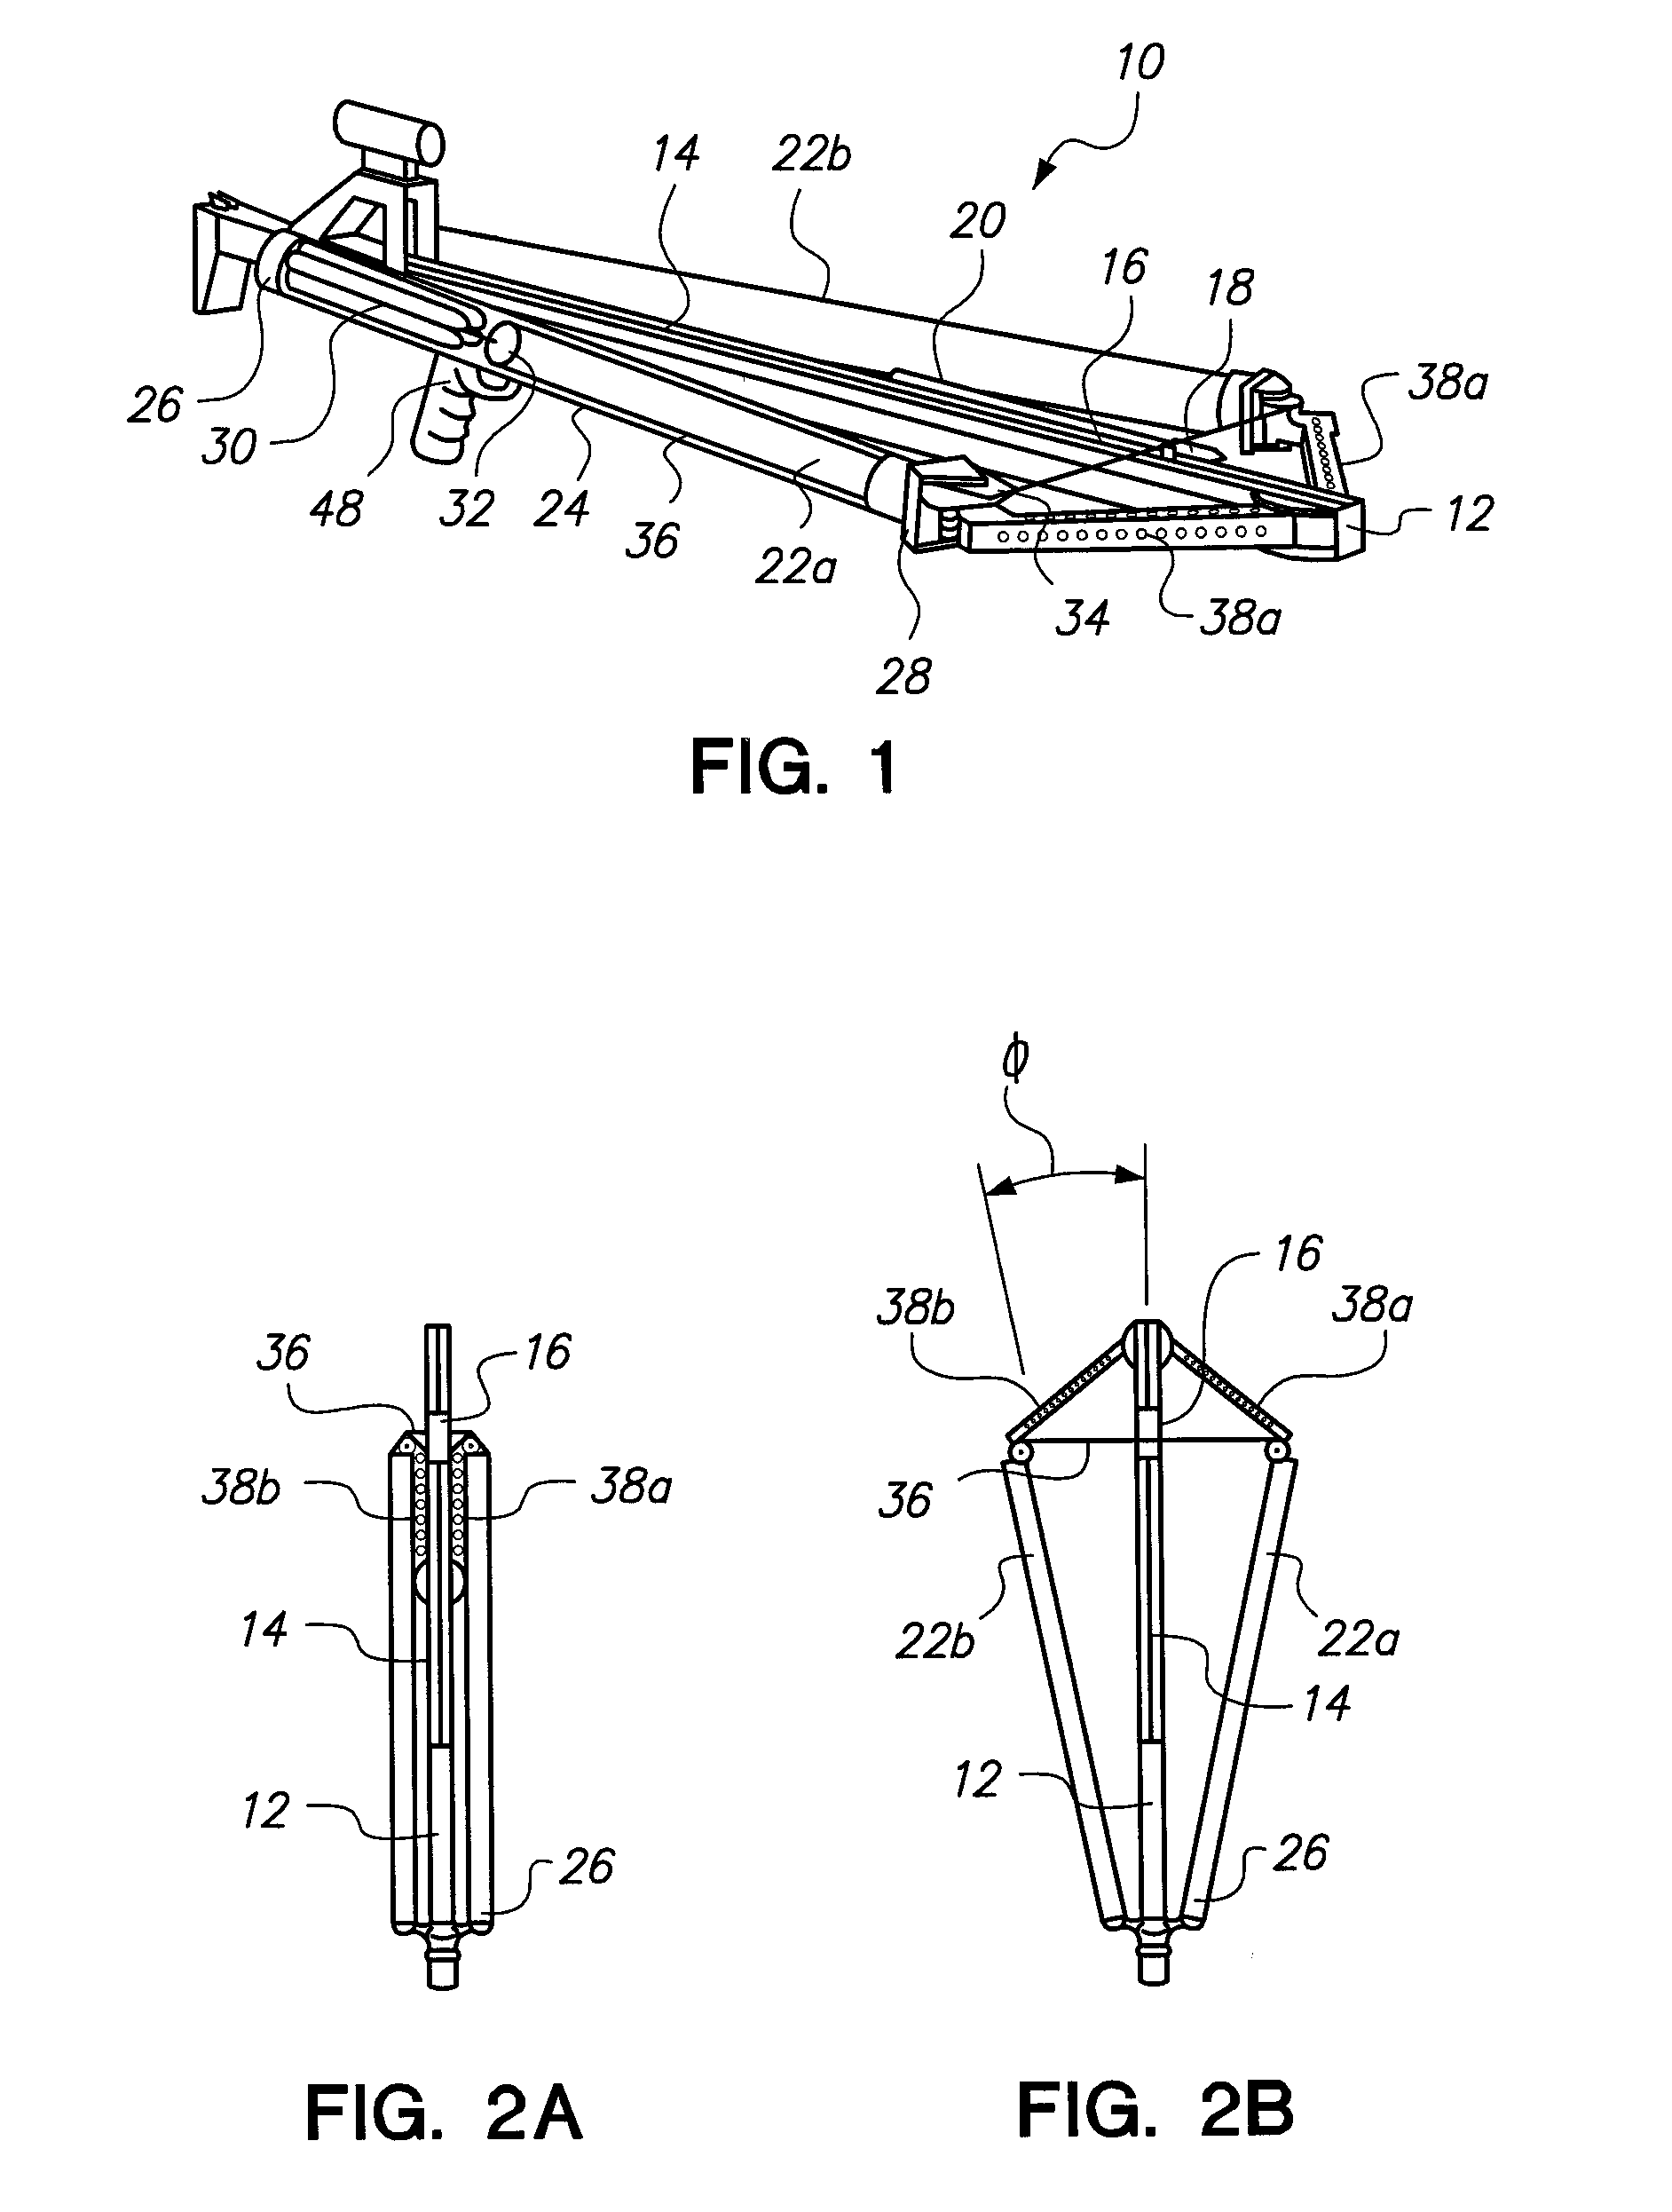 Projectile launching device